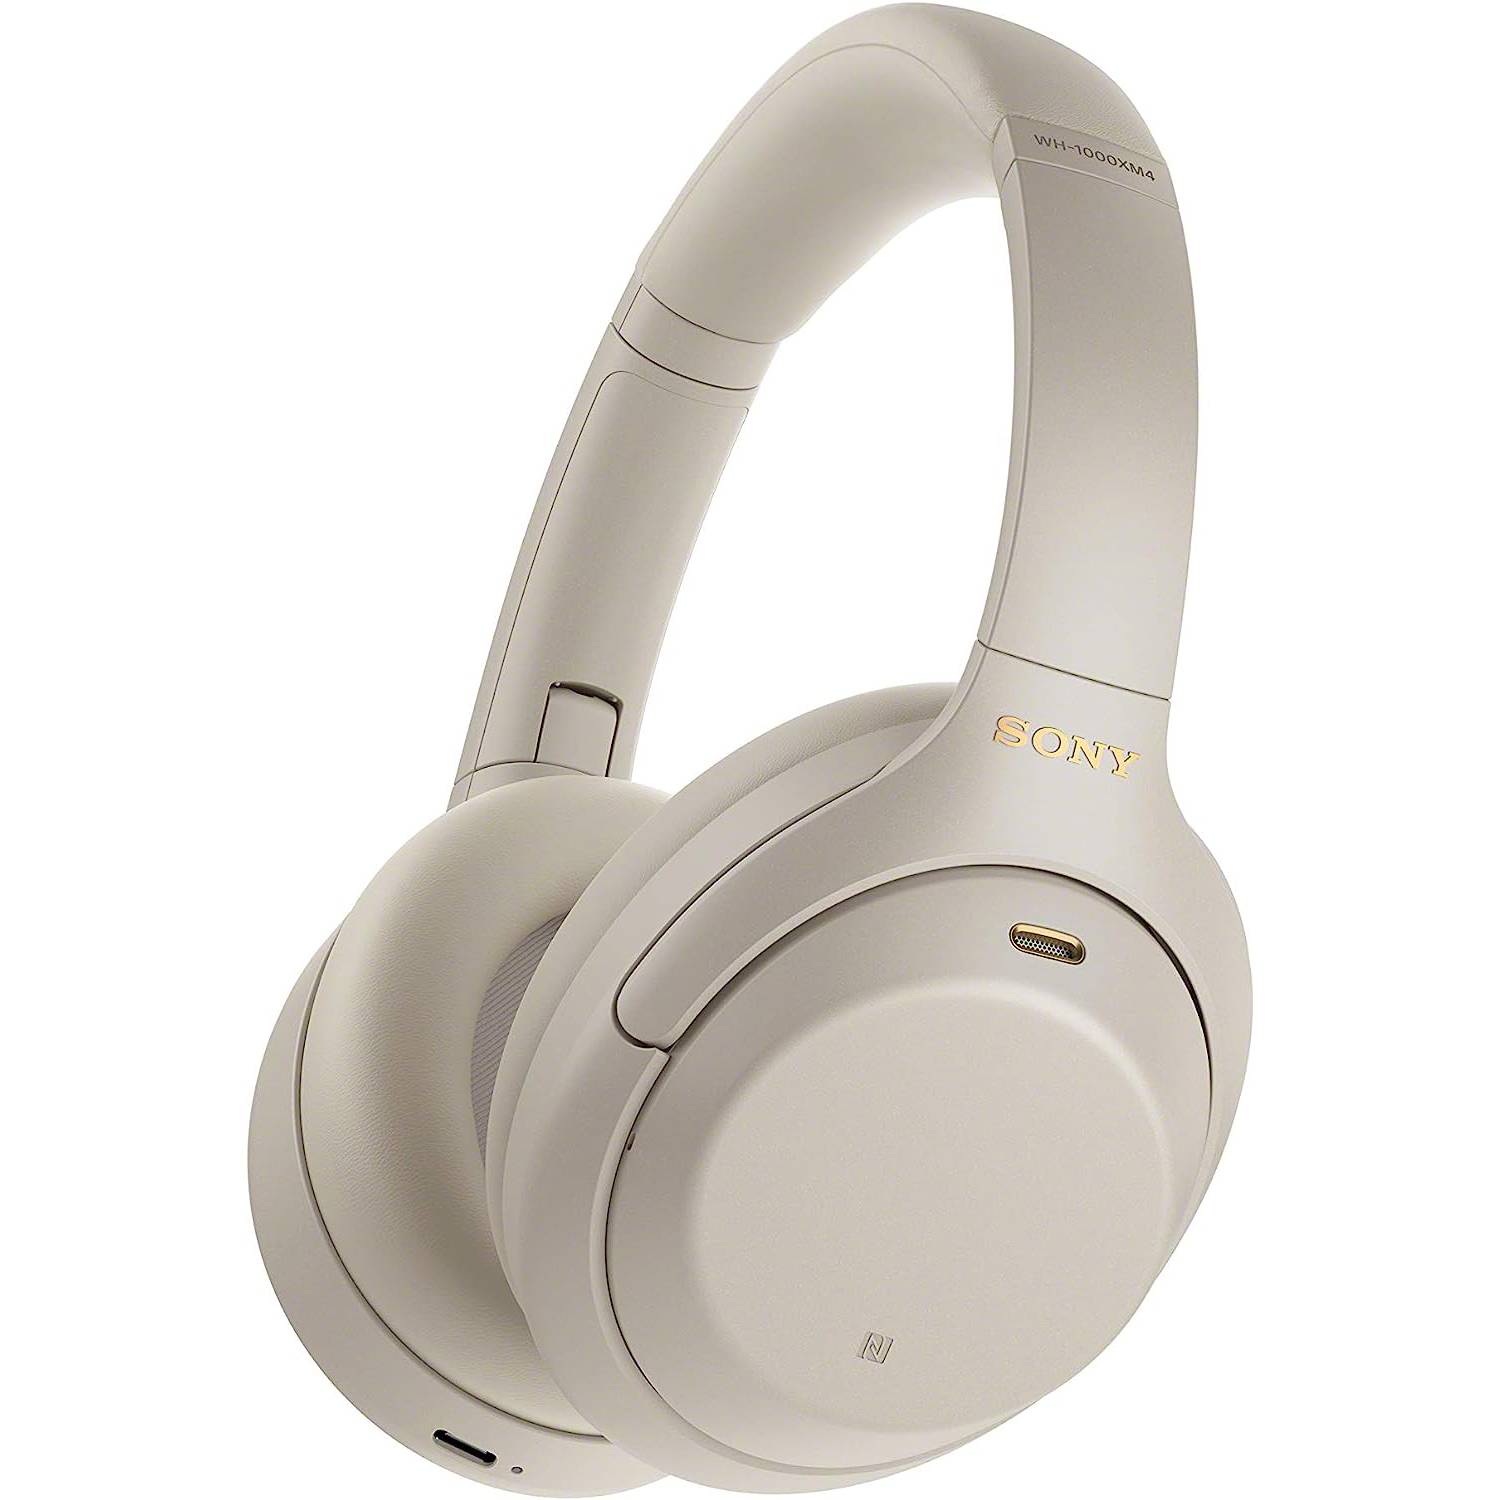 Sony WH1000XM4 - Auriculares inalámbricos Noise Cancelling plata SONY